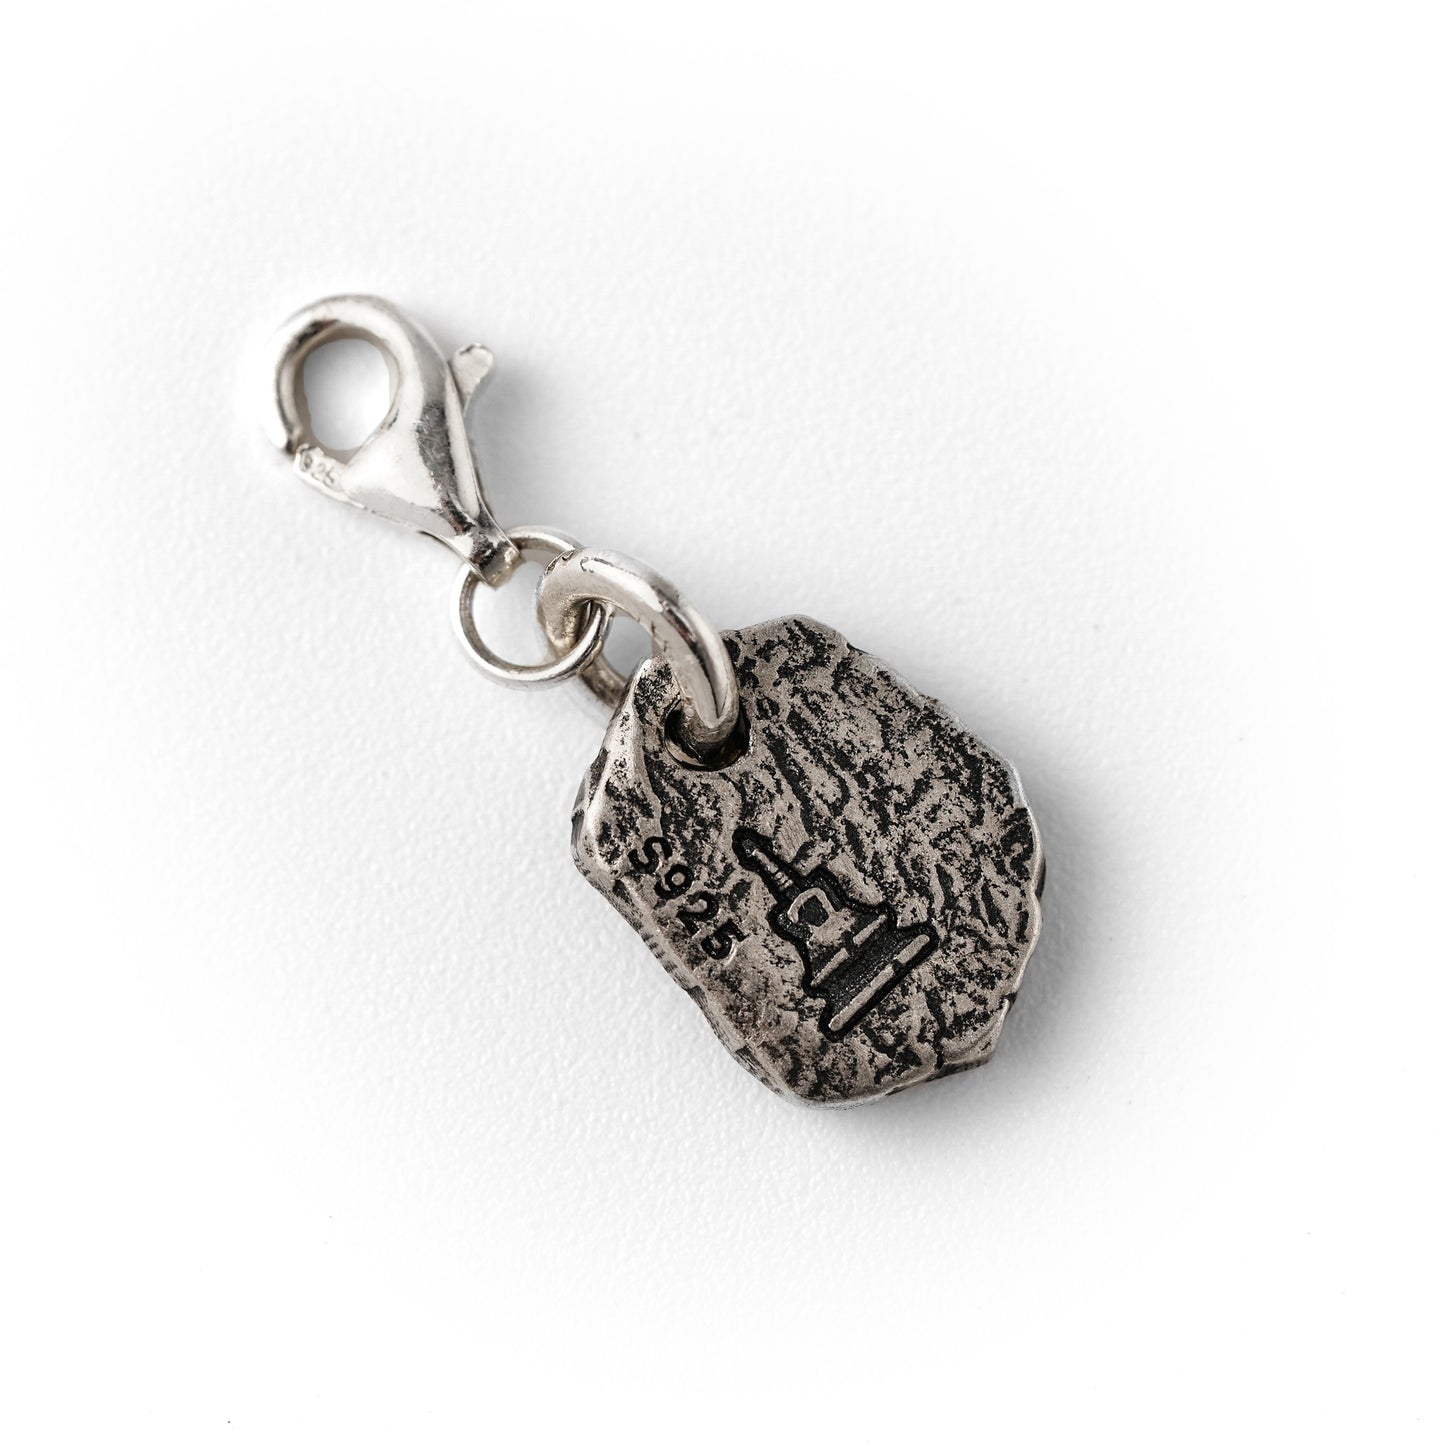 Fortune and prosperity - Zakilam Silver Charm from Tibet